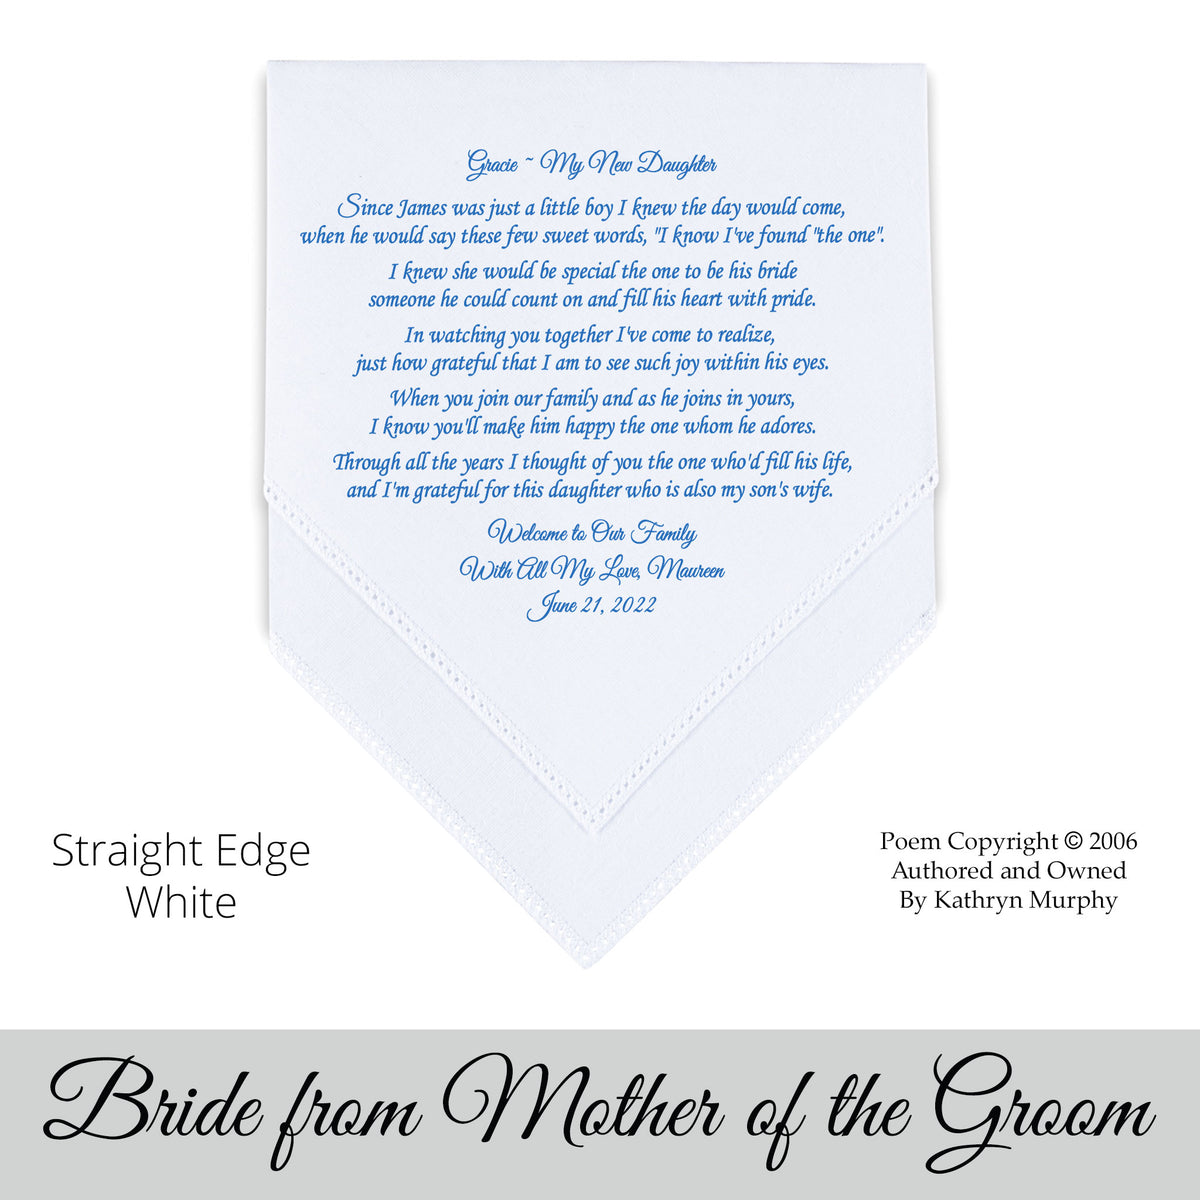 Gift for the Bride wedding hankie with the poem My New Daughter